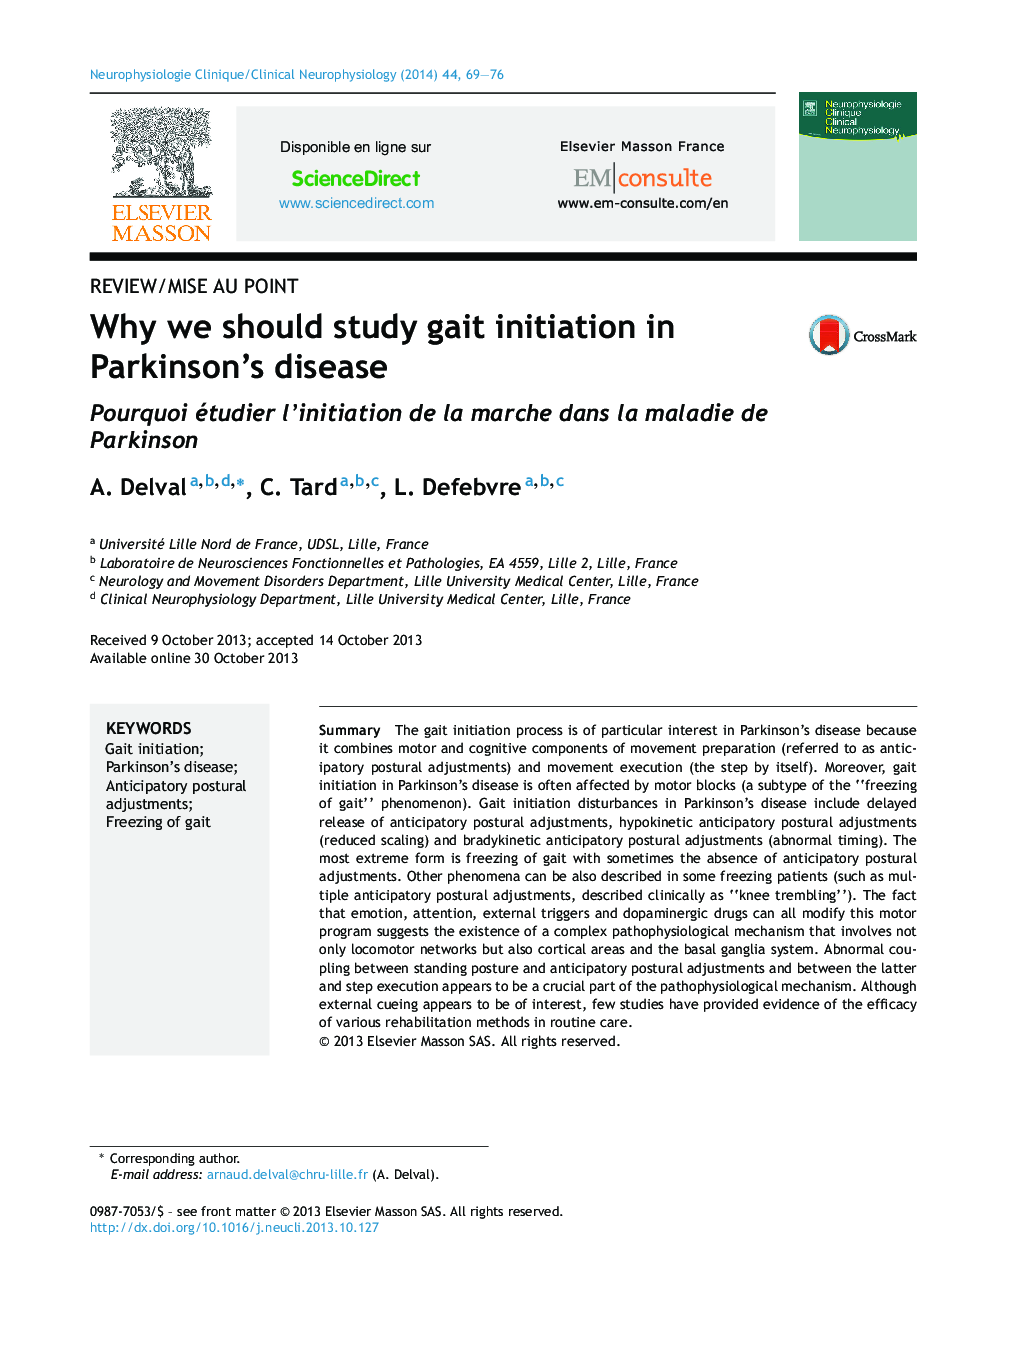 Why we should study gait initiation in Parkinson's disease